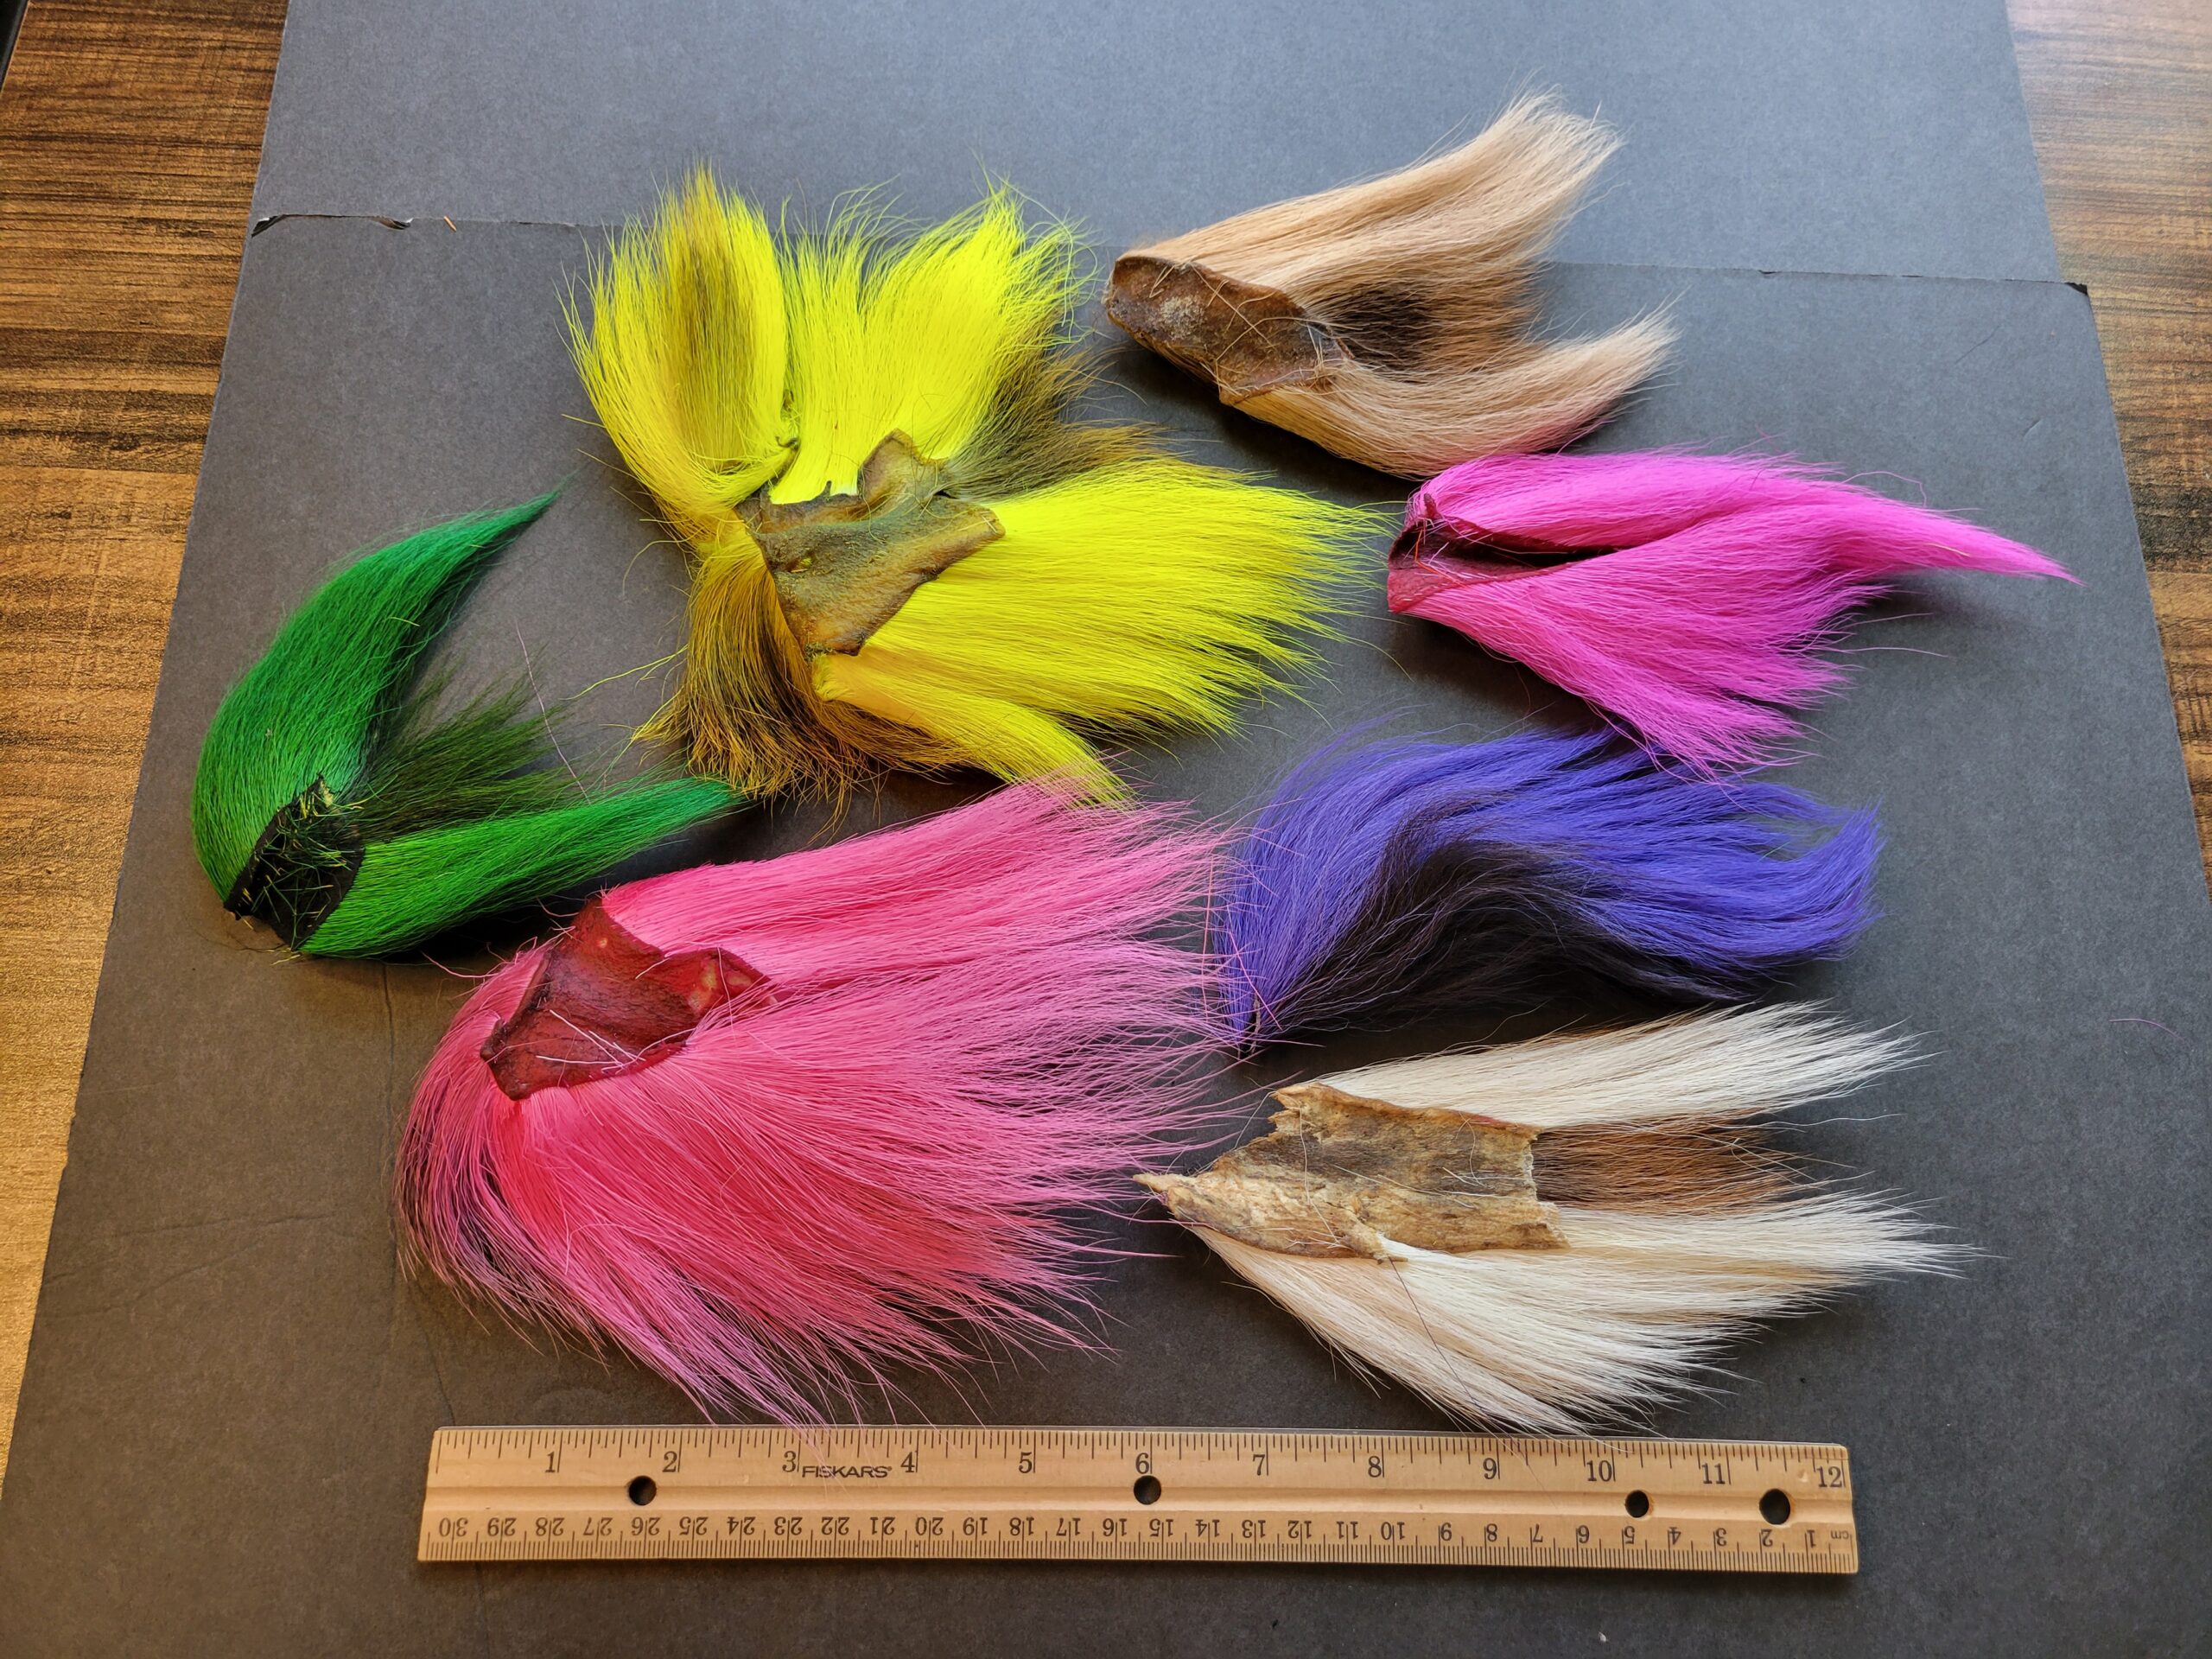 Lot 19, VARIETY PACK COLORED Deer Tail Bucktail Pieces Buck Tail for Fly  Tying - Lady Fly Tyer